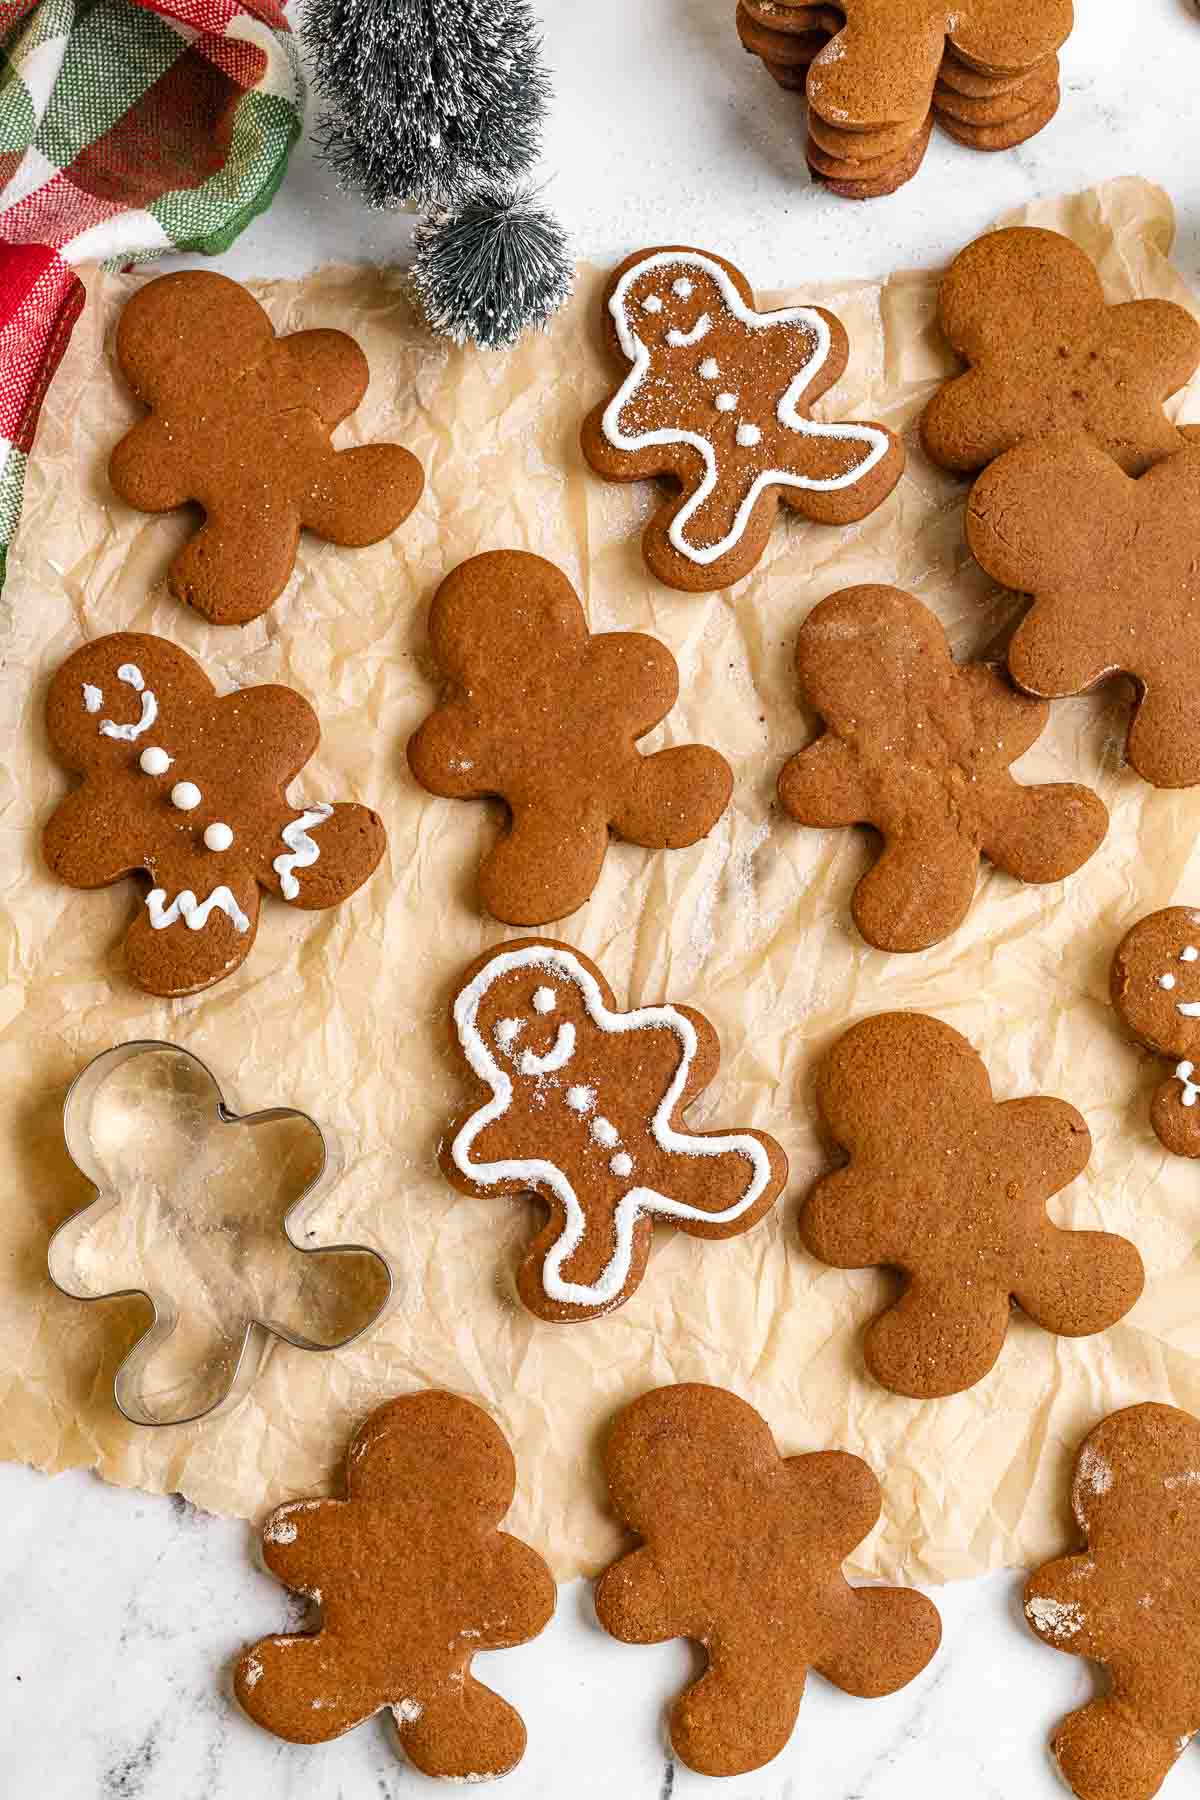 Chocolate Gingerbread Men being decorated